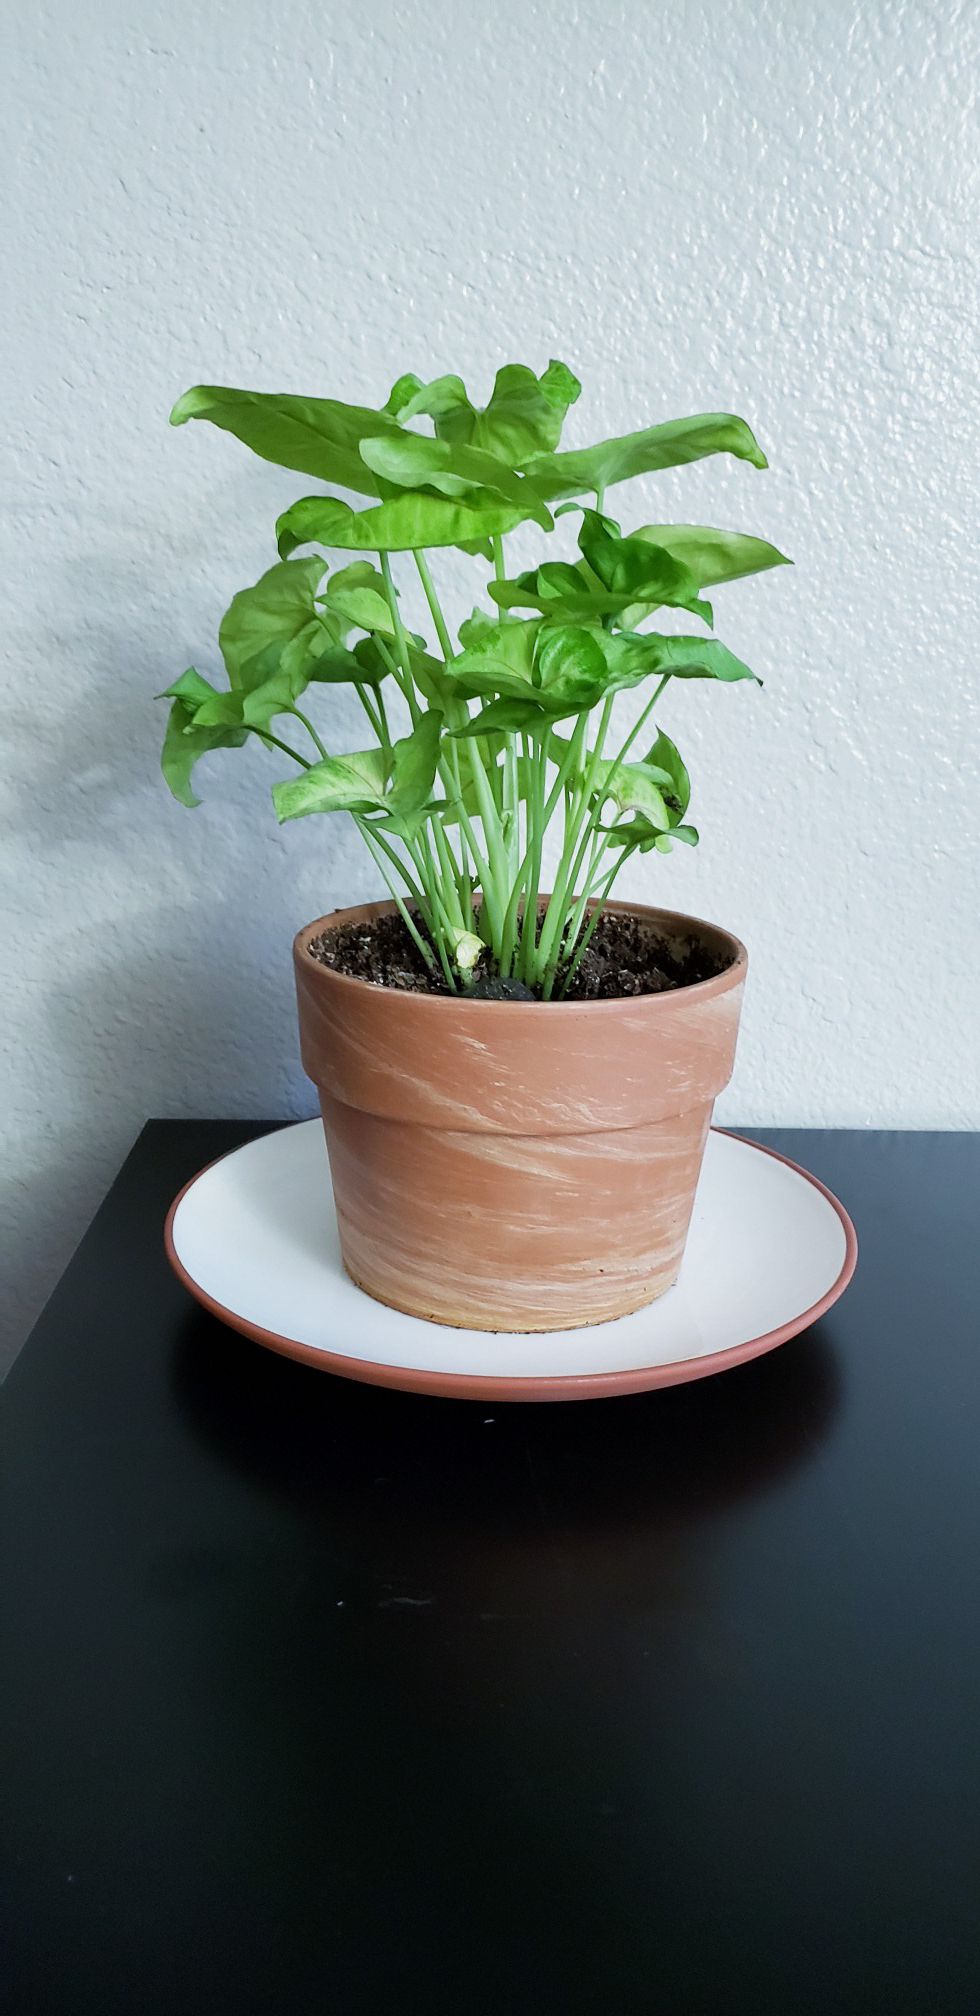 Live arrowhead plant in terracotta pot with terracotta plate